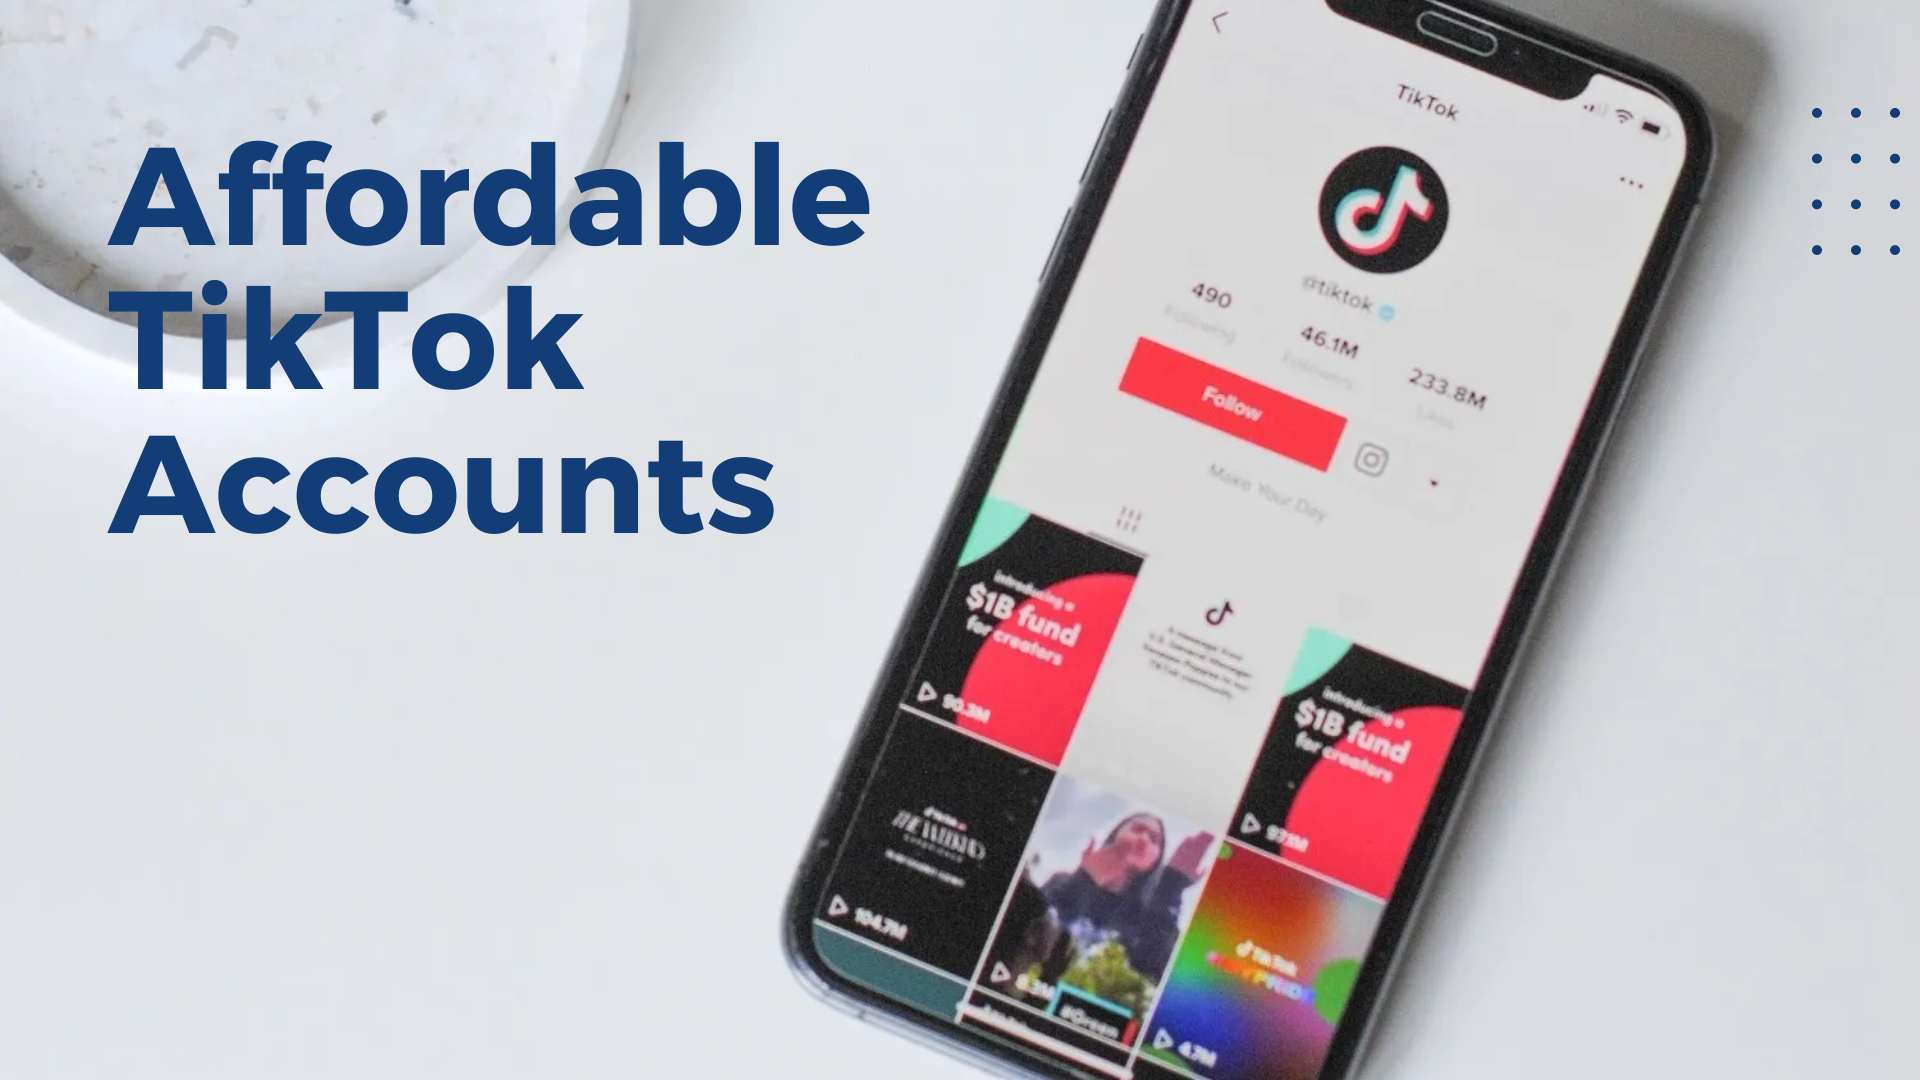 Trusted Marketplaces for Affordable TikTok Accounts – TikTok Accounts for Sale